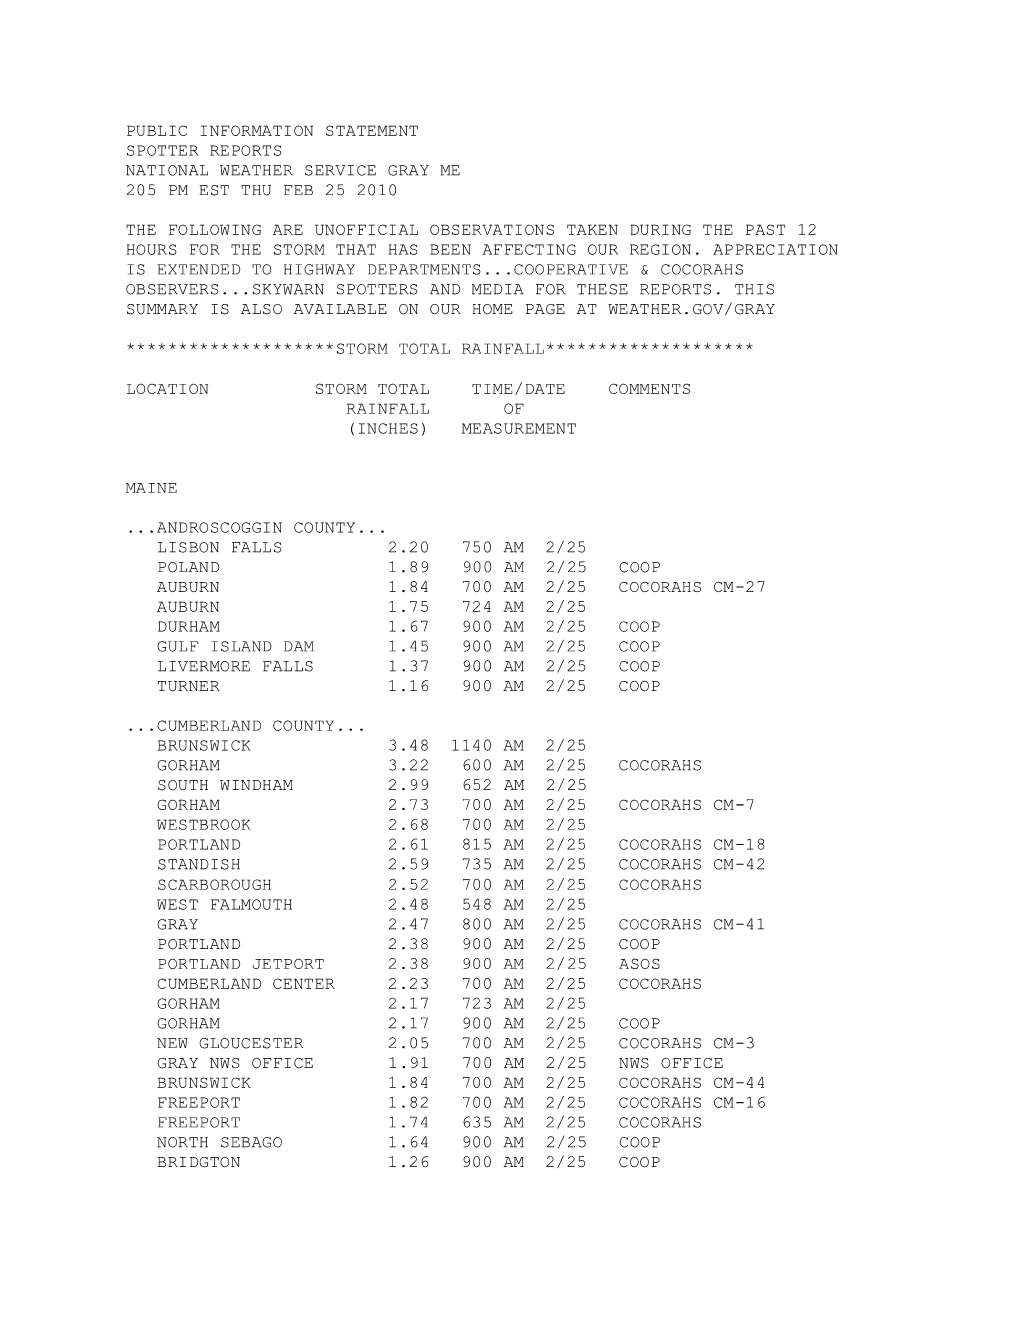 Public Information Statement Spotter Reports National Weather Service Gray Me 205 Pm Est Thu Feb 25 2010